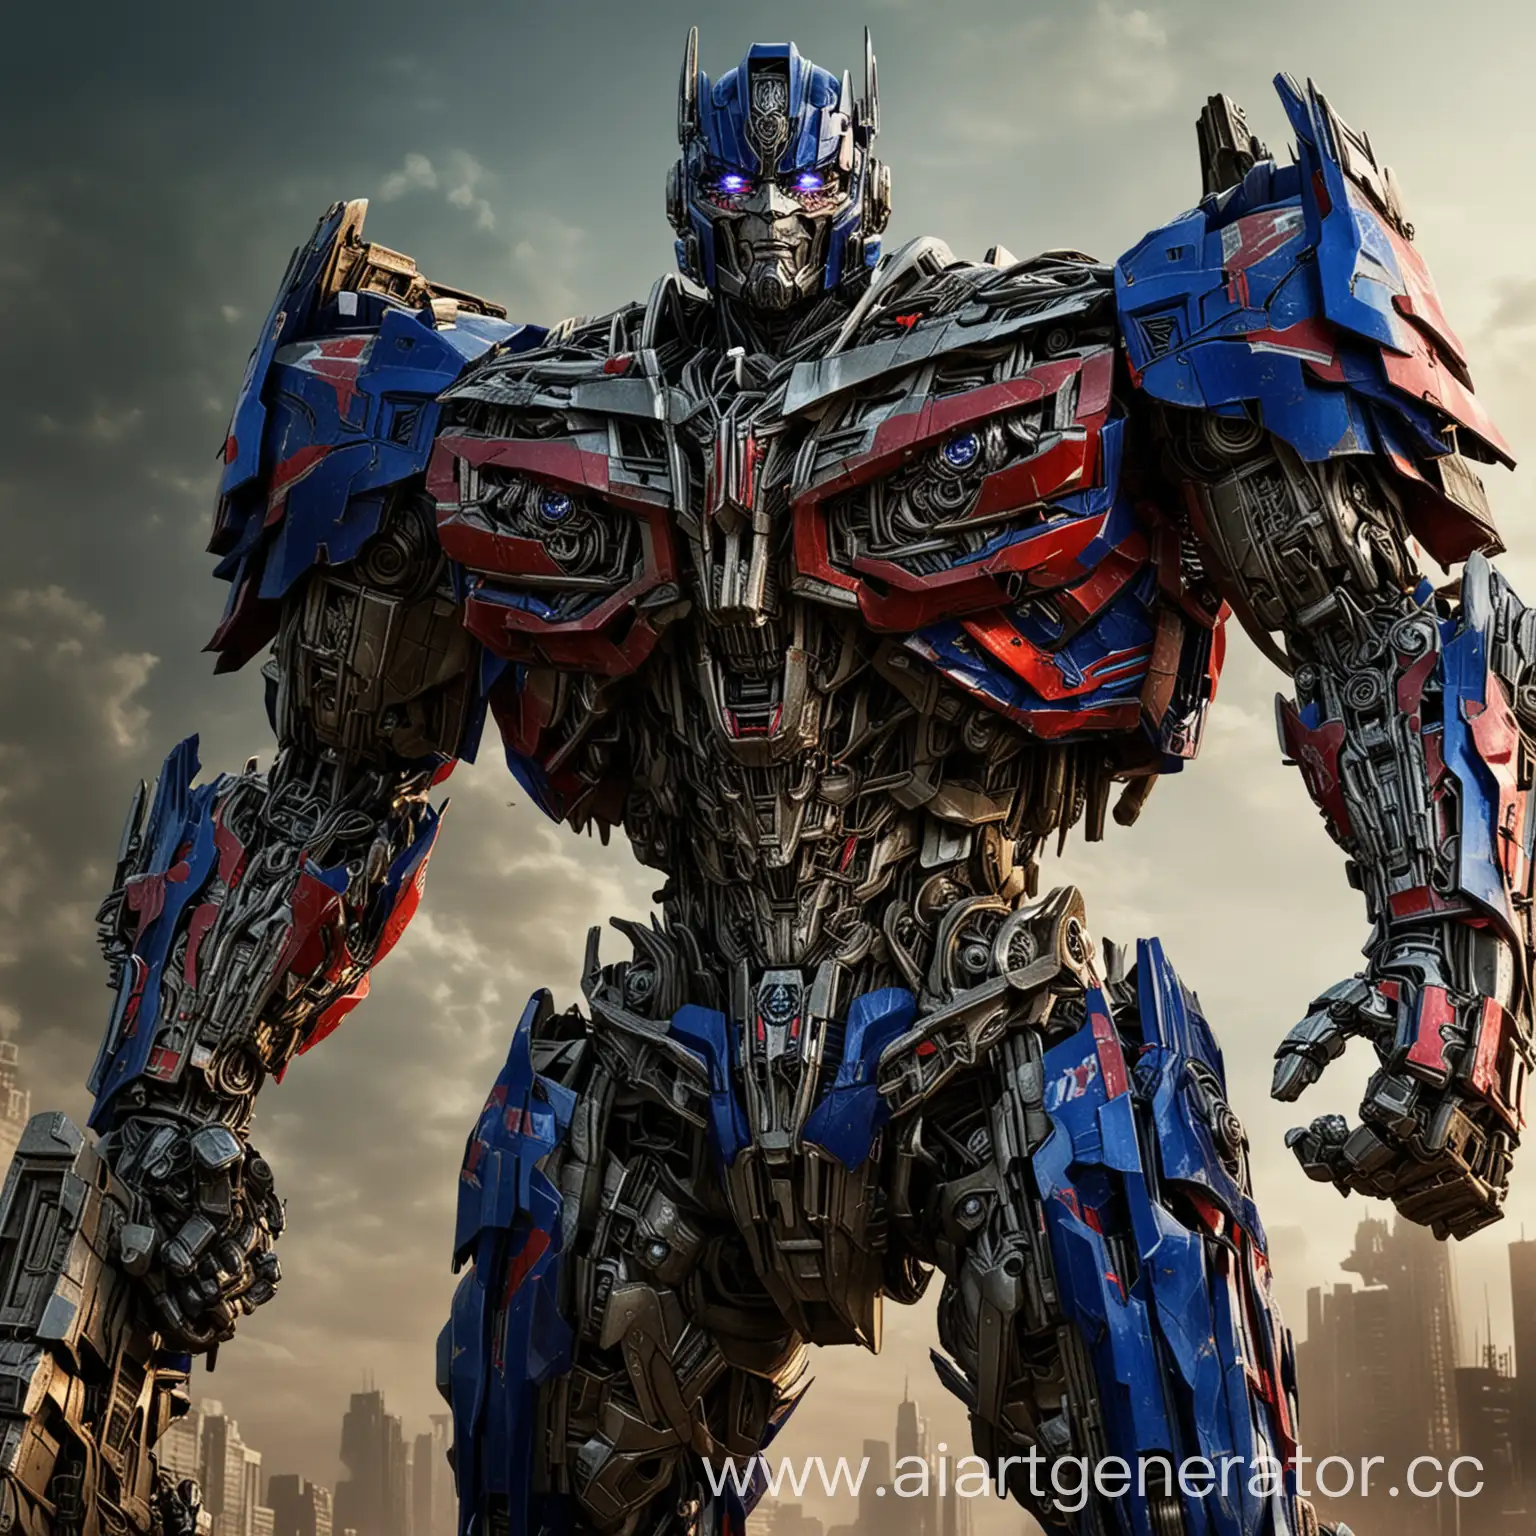 Transformers-8-Epic-Battle-with-Optimus-Prime